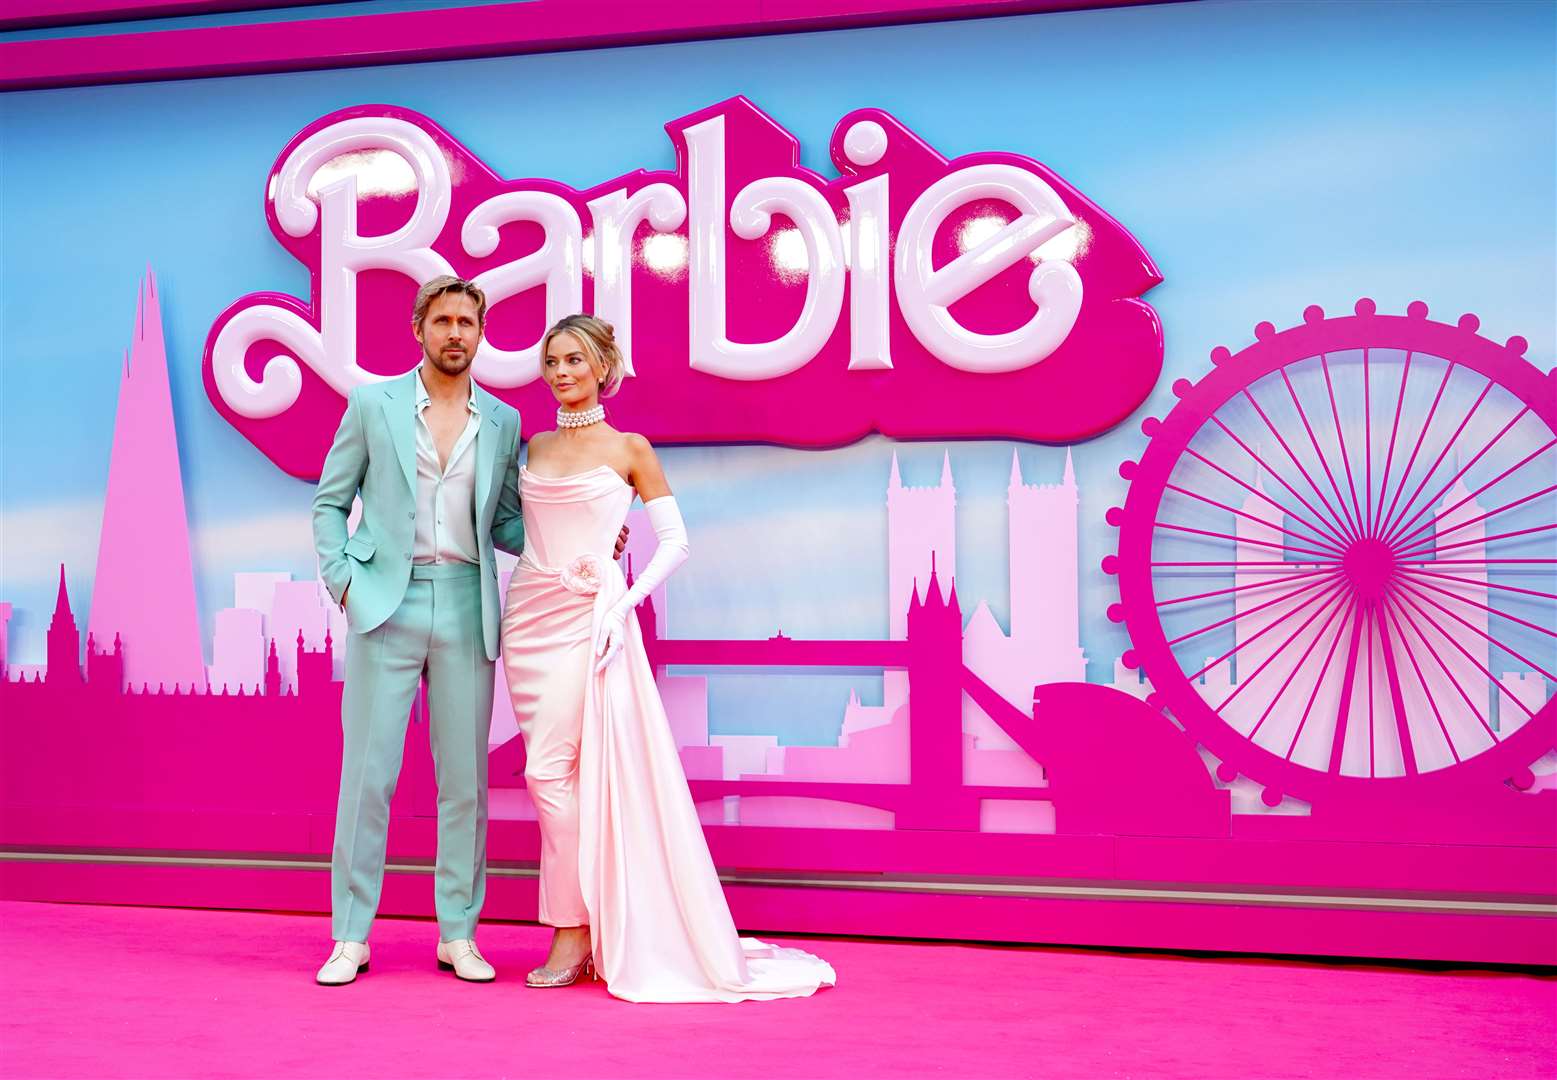 Ryan Gosling and Margot Robbie at the European premiere of Barbie in London (Ian West/PA)